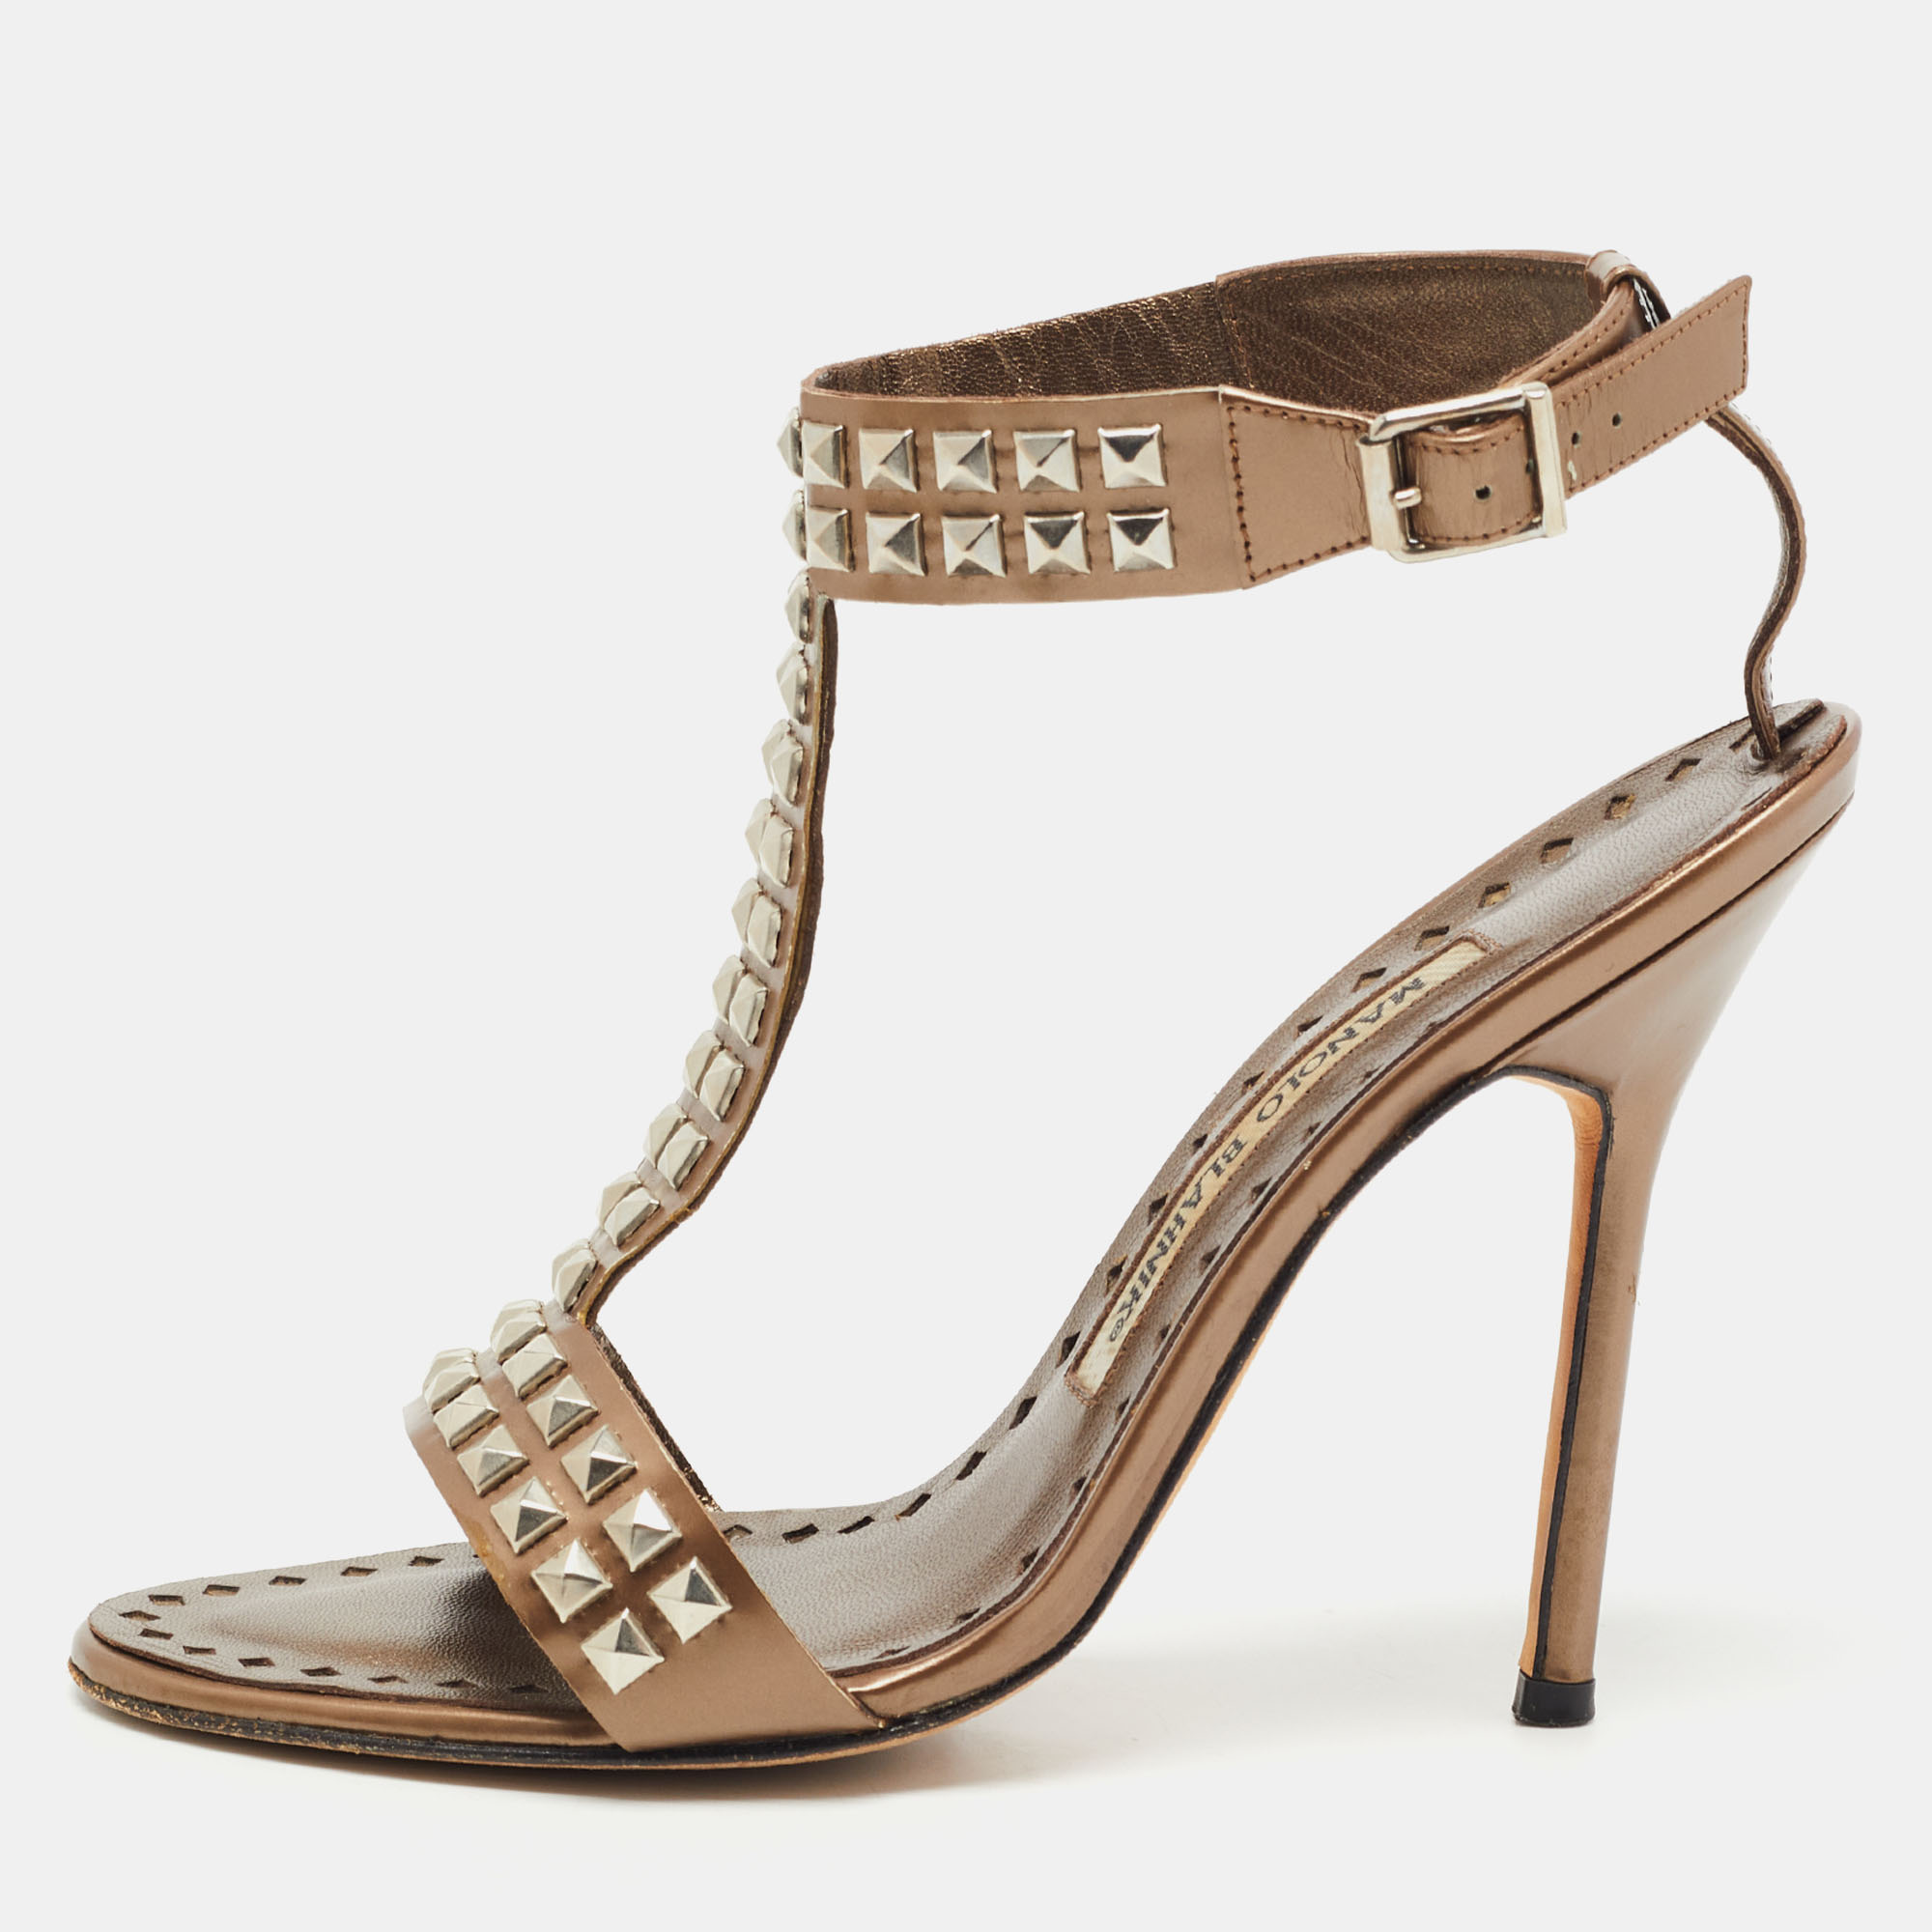 Pre-owned Manolo Blahnik Metallic Brown Leather Studded T Strap Sandals Size 35.5